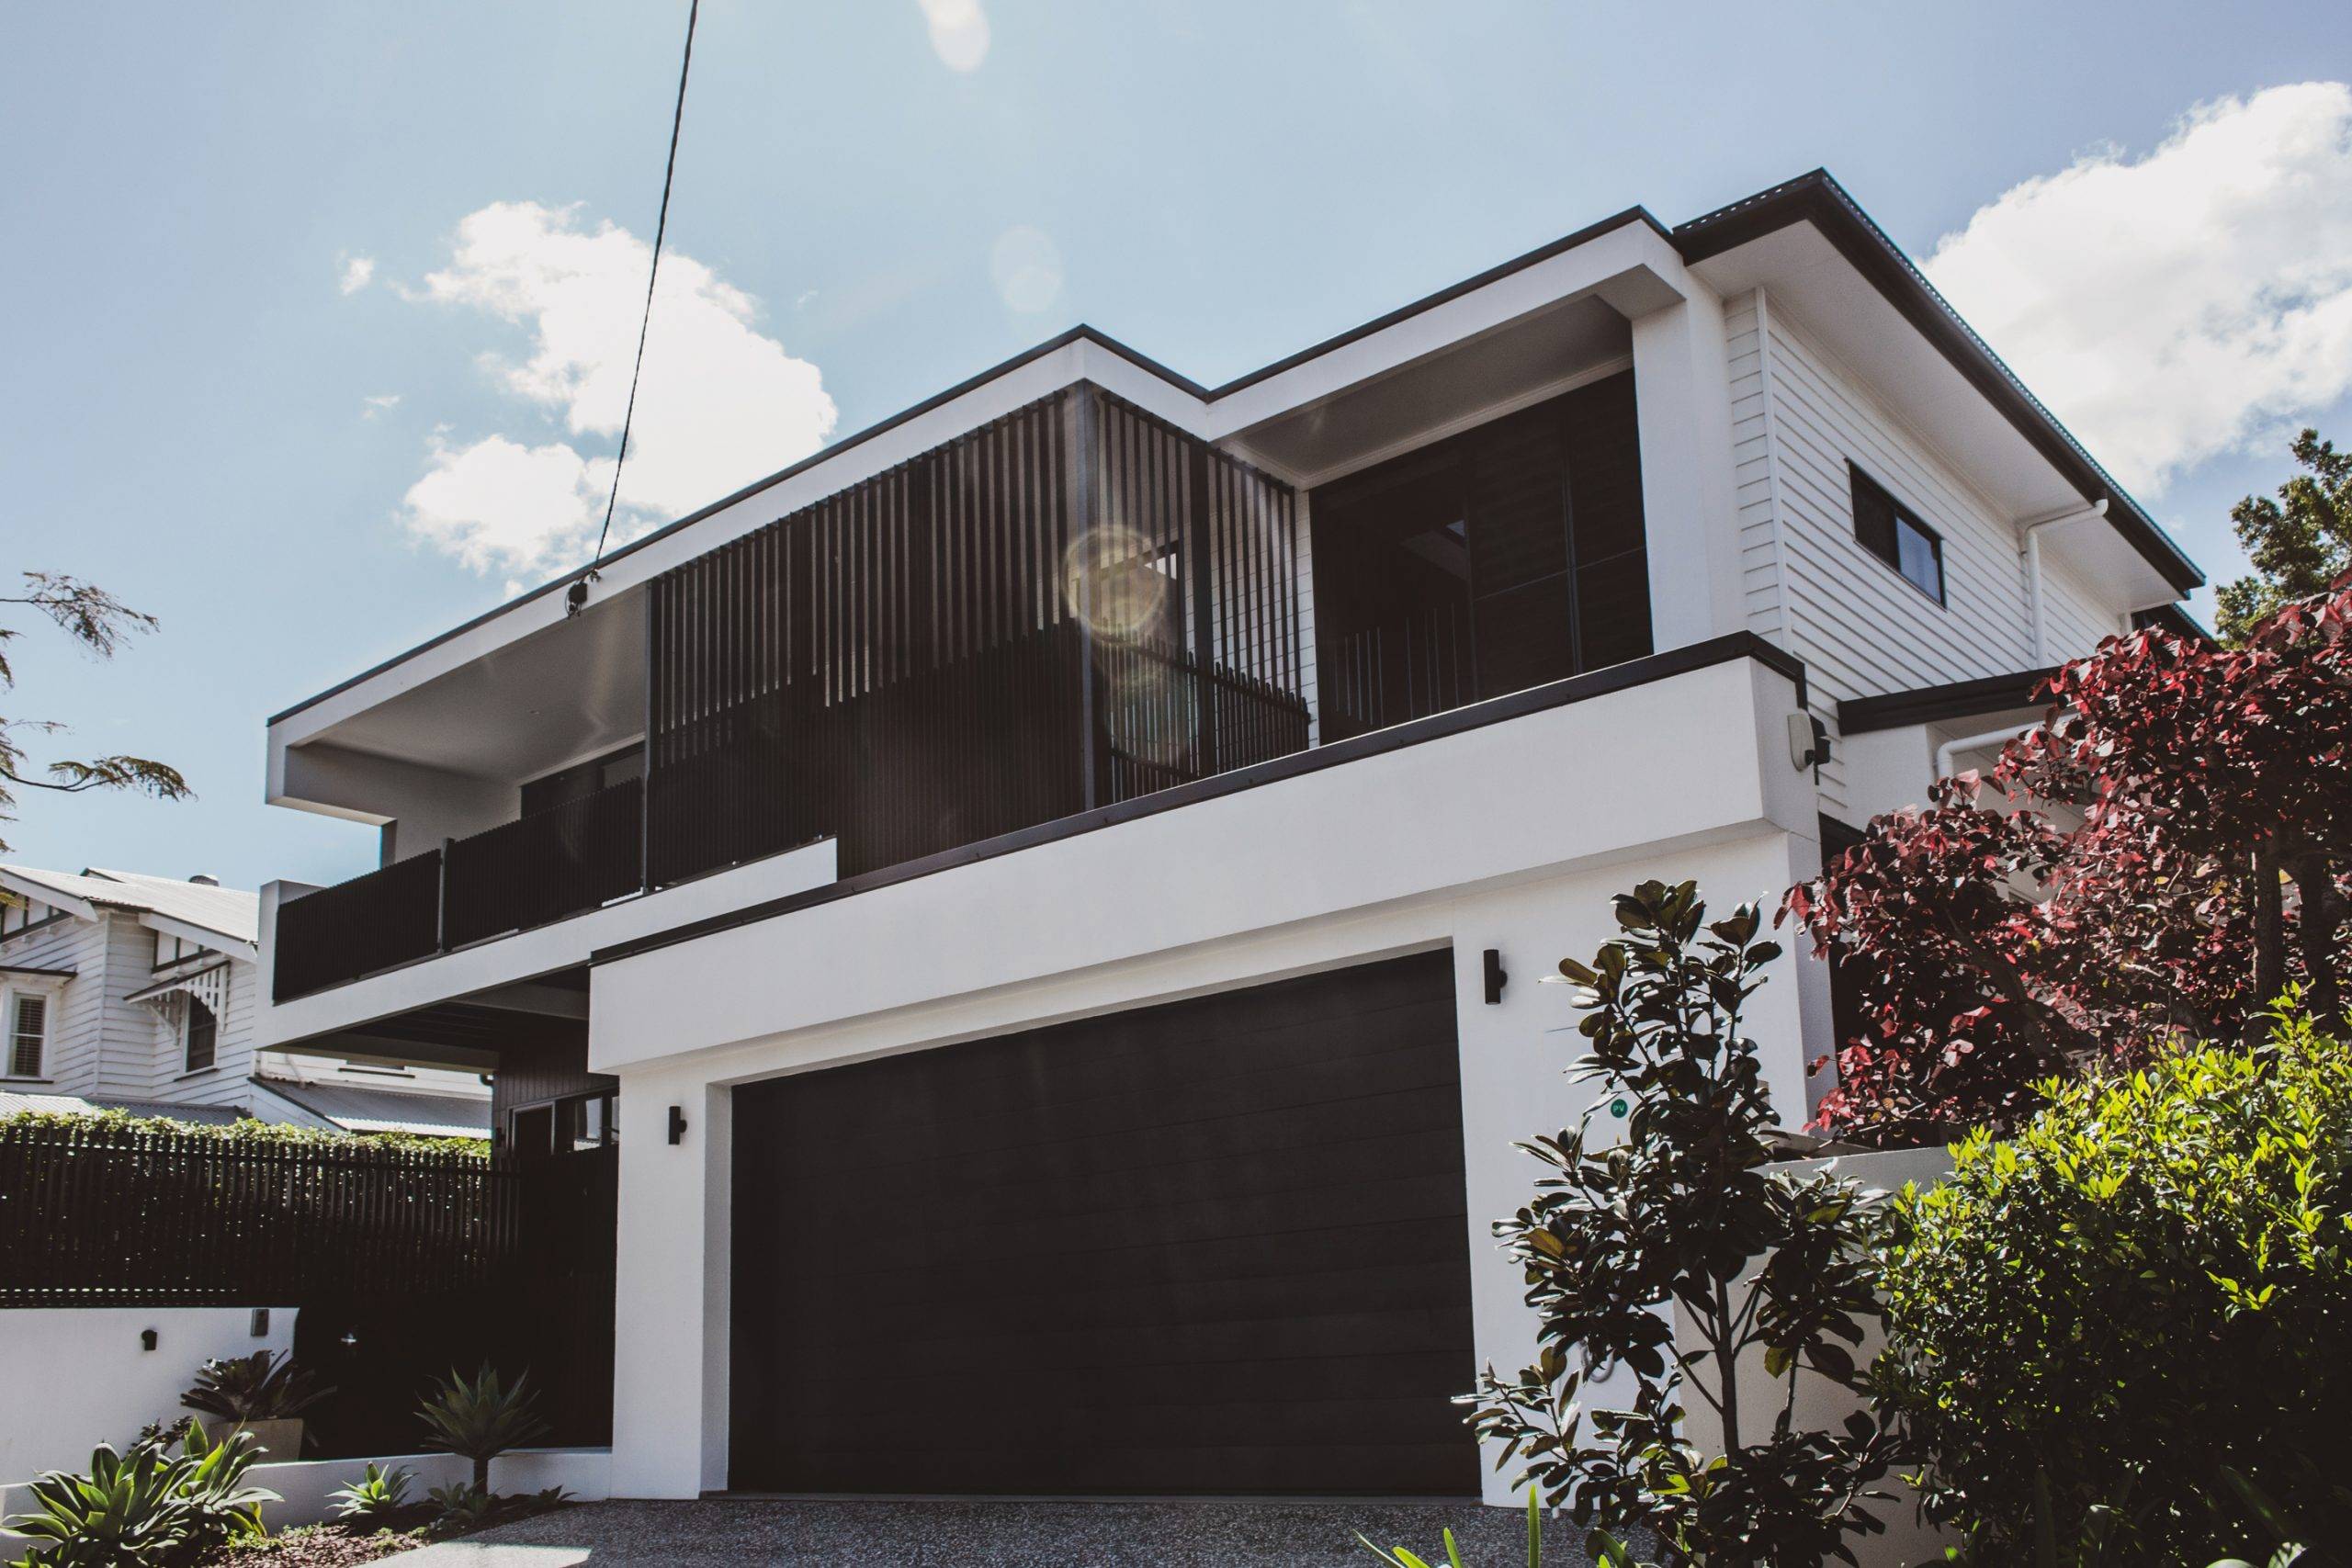 Reeve St Architect designed minimalist, modern home, Minimalist palette of white, black, stained timber, and terrazzo tiles, Traditional Character Area, traditional Queenslander style